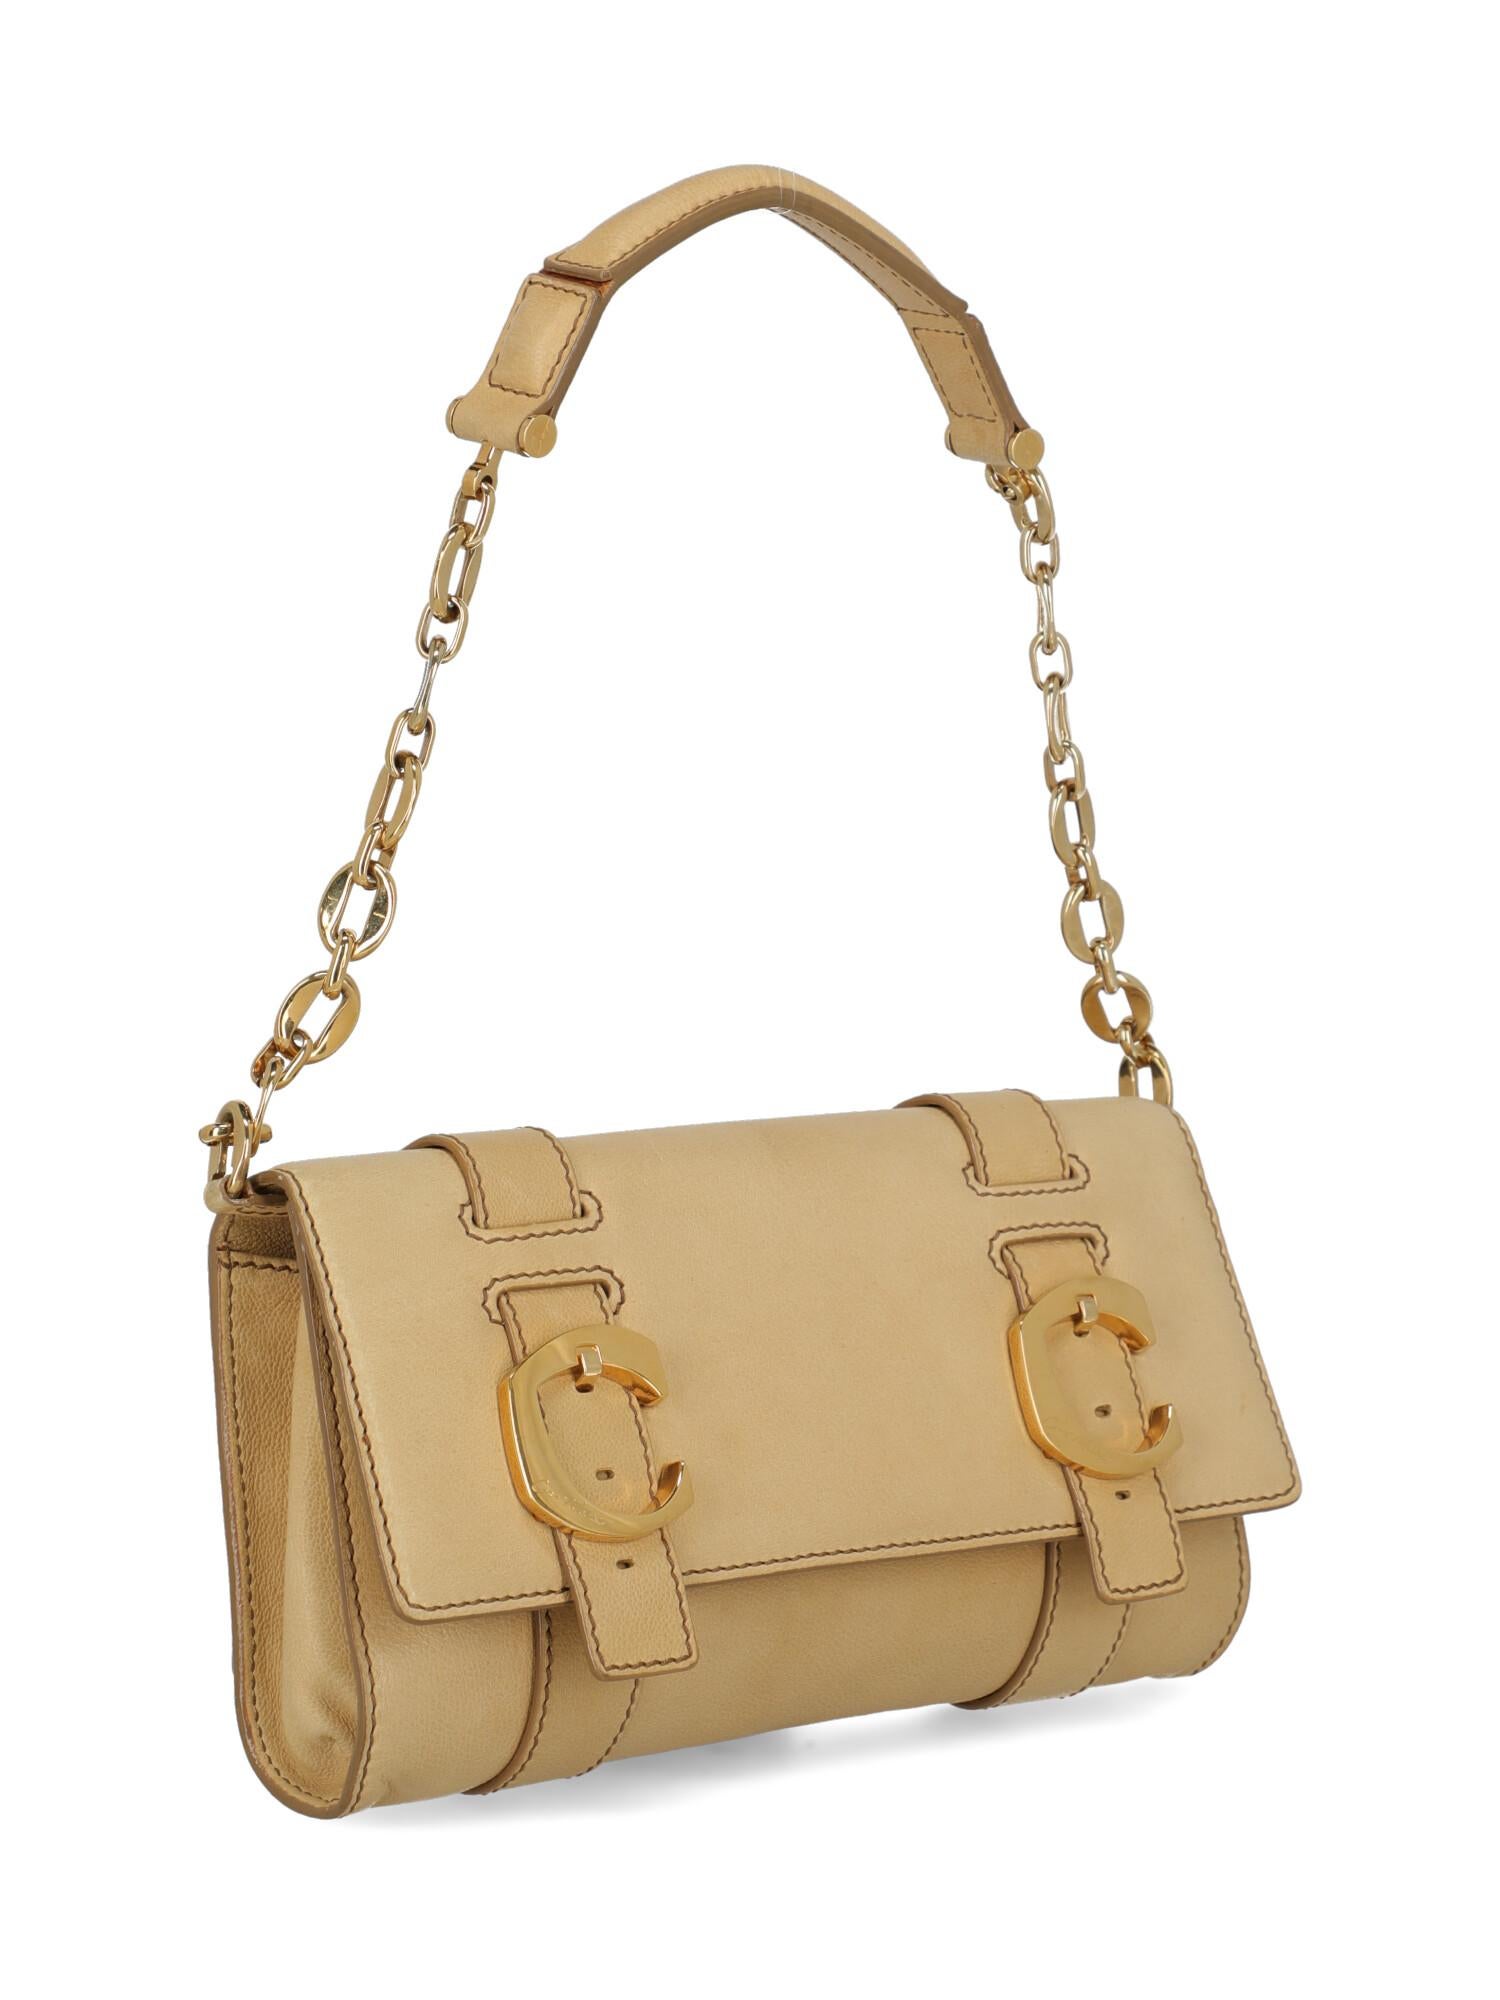 Corto Moltedo Woman Shoulder bag Beige Leather In Fair Condition For Sale In Milan, IT